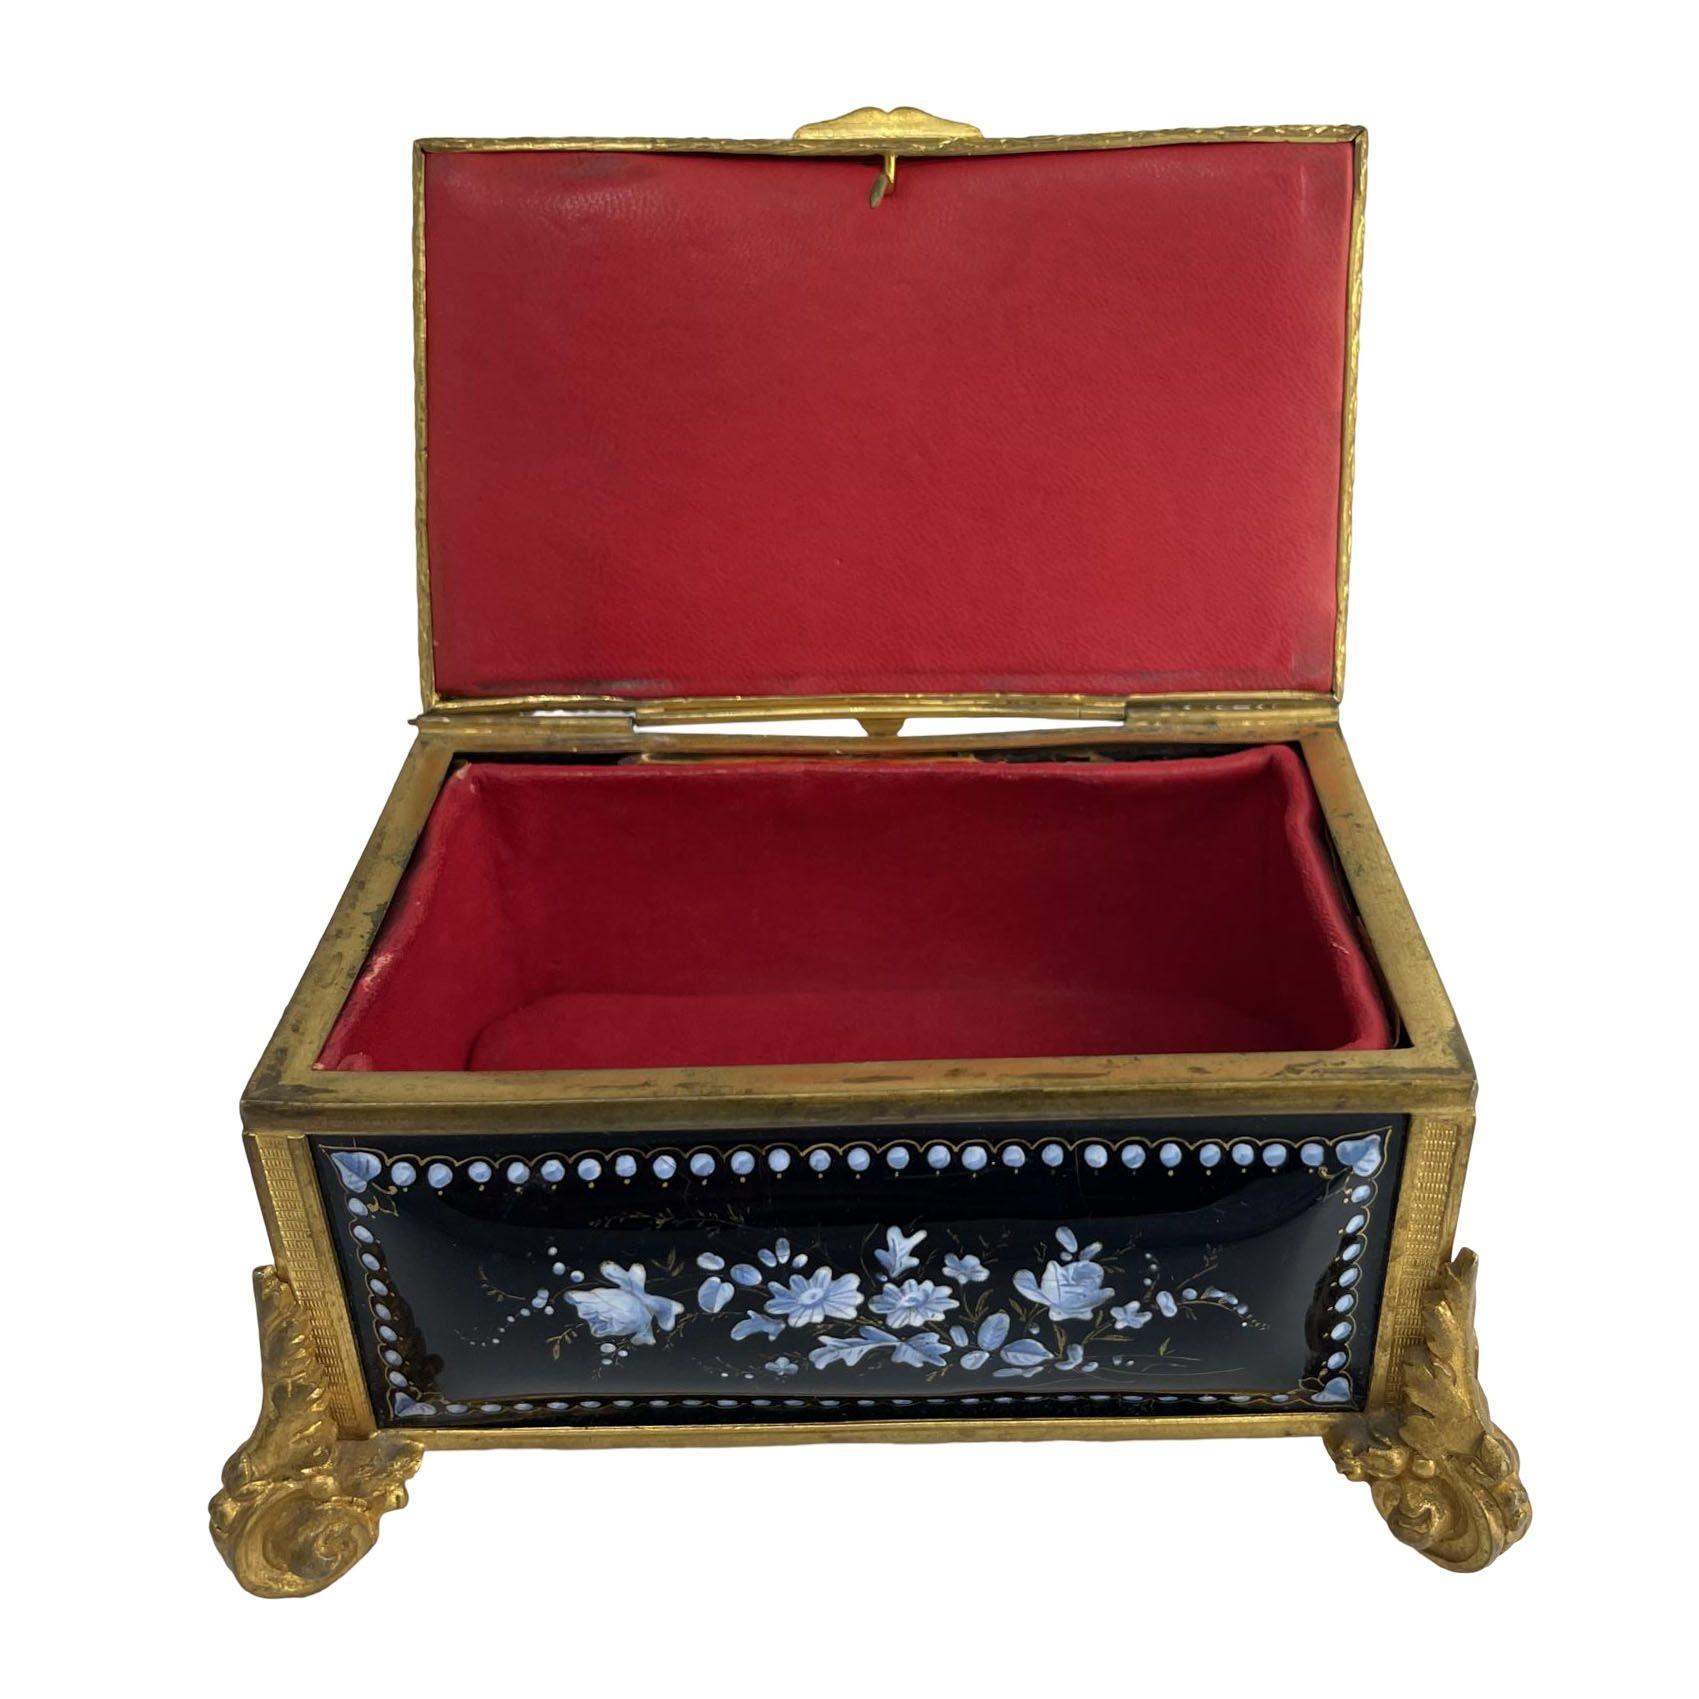 One-of-a-kind 19th century Limoges hand-painted porcelain keepsake box with brass footing for your consideration.
This delightful porcelain jewelry keepsake box is decorated with hand-painted baby blue flower bouquets with gold painted detail. It